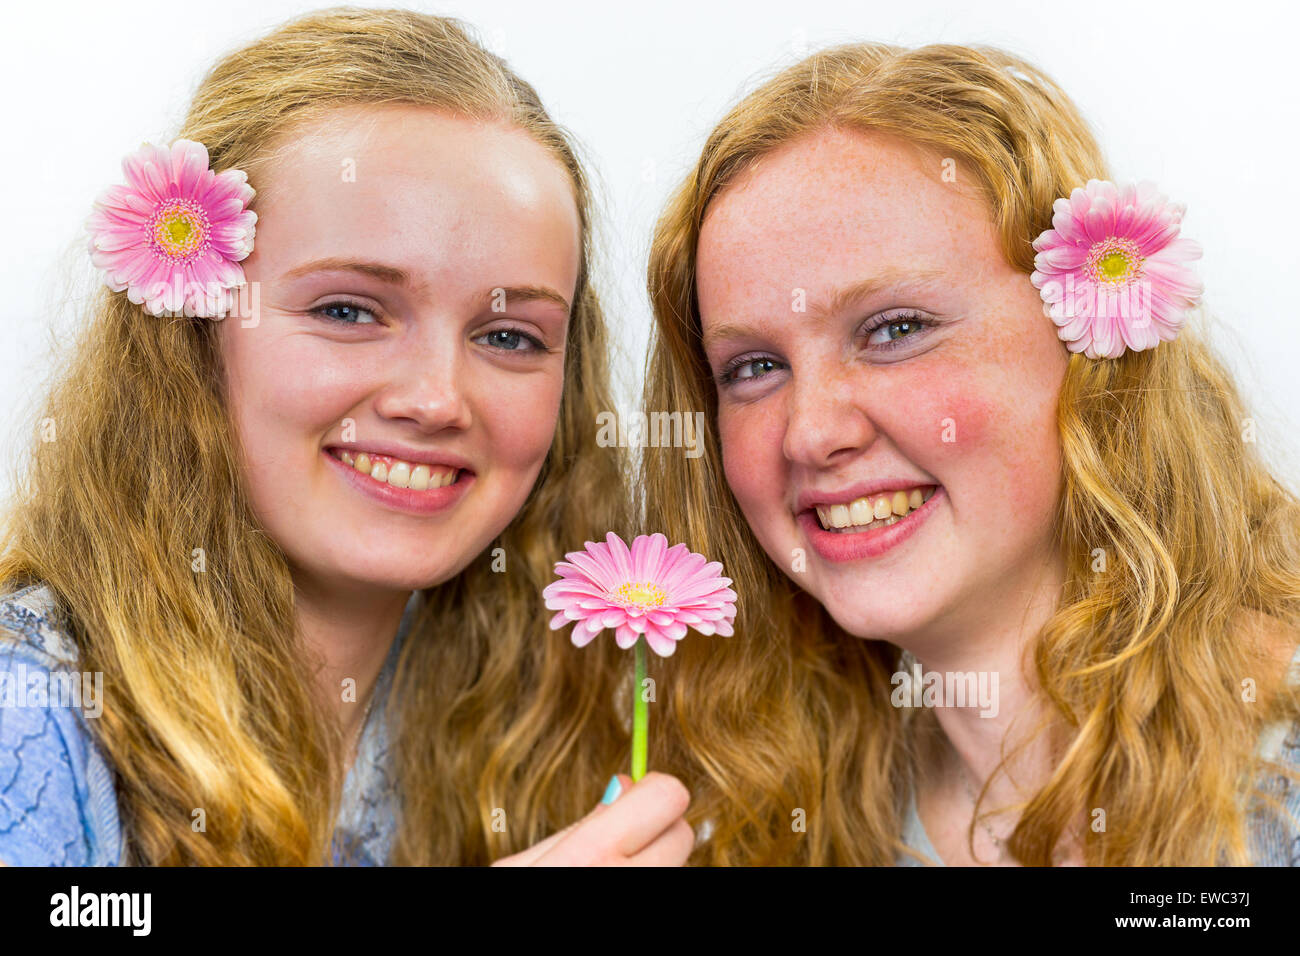 Two caucasian teenage girls laughing with pink flowers in long hair isolated on white background Stock Photo